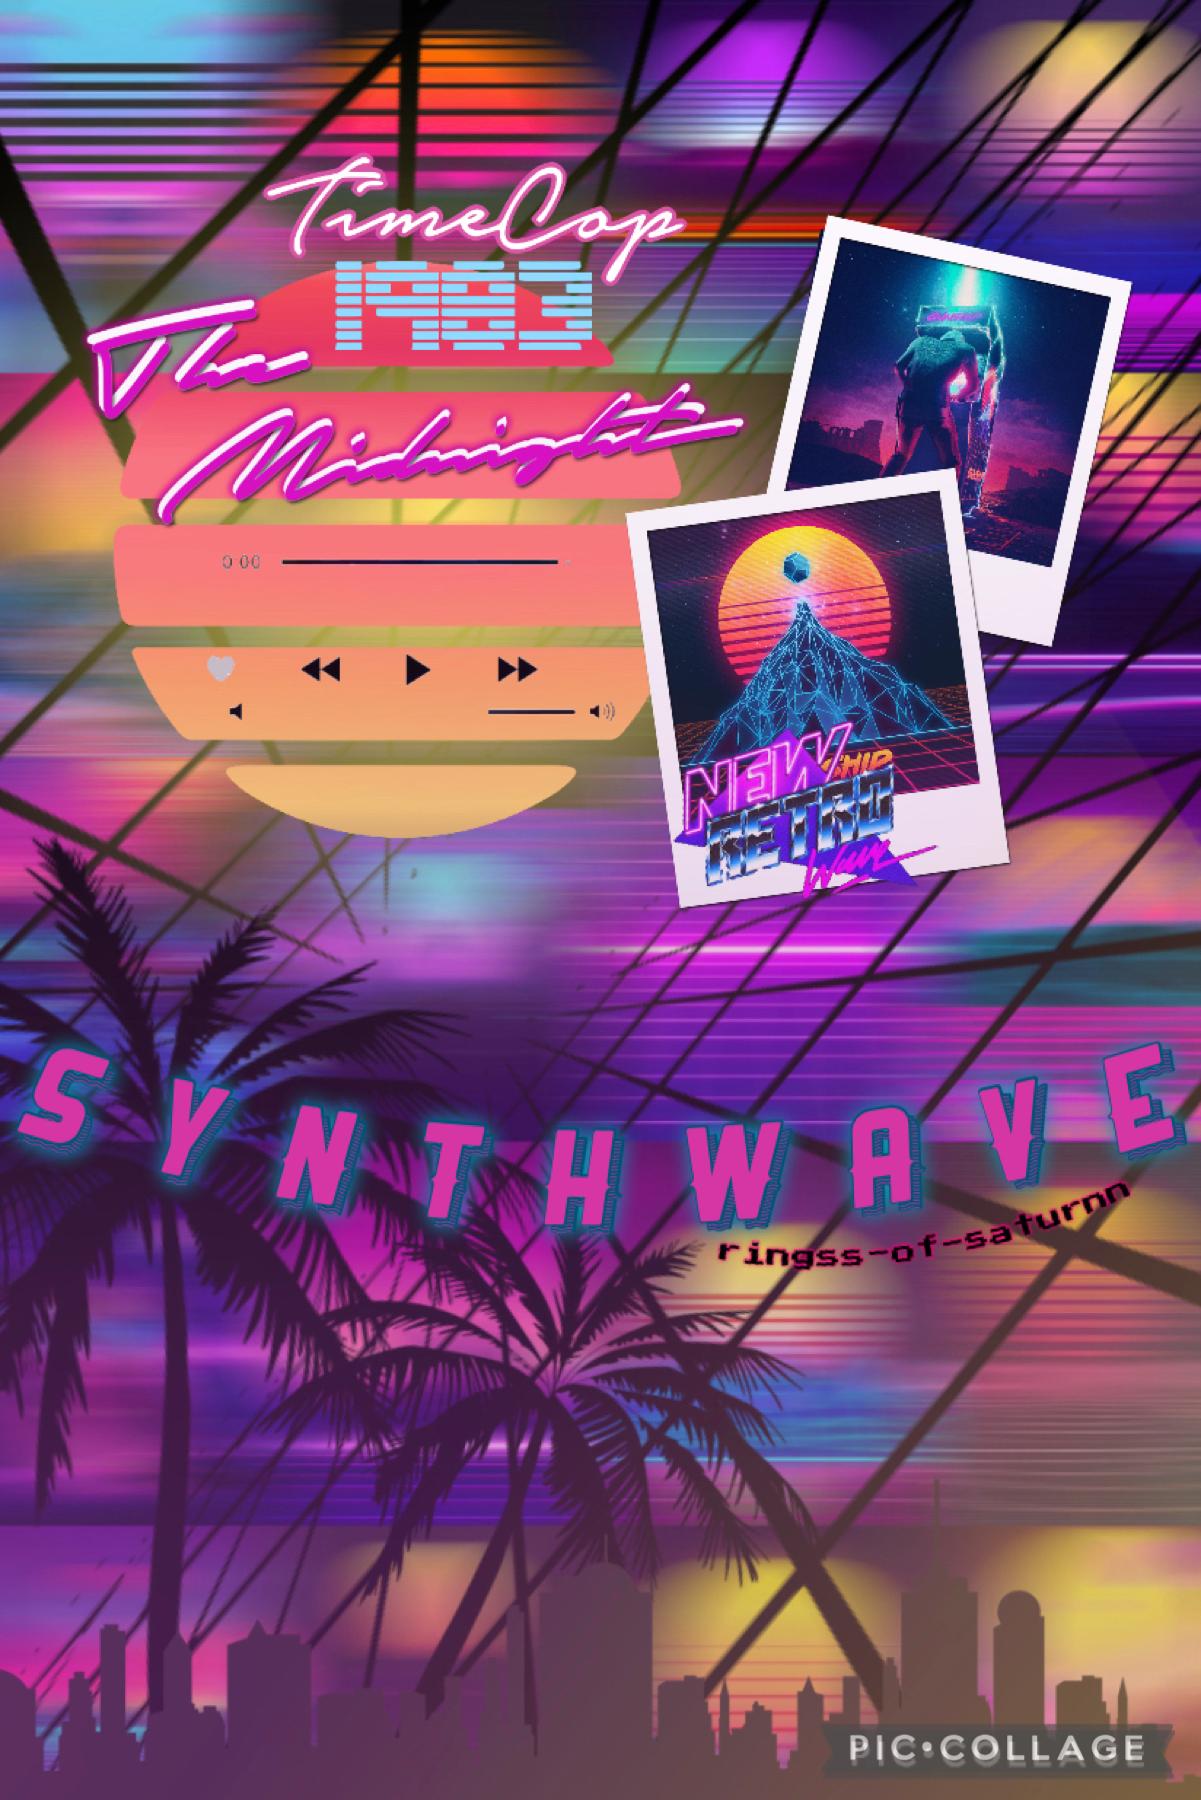 👾tap⚡️
synthwave/vaporwave themed collage!! i’m currently obsessing over this aesthetic and music genre!!

QOTD: what’s your favorite music genre?
{A}: EDM, but fav SUBgenre is currently synthwave, ofc. 

hope you all have a lovely day!! <3